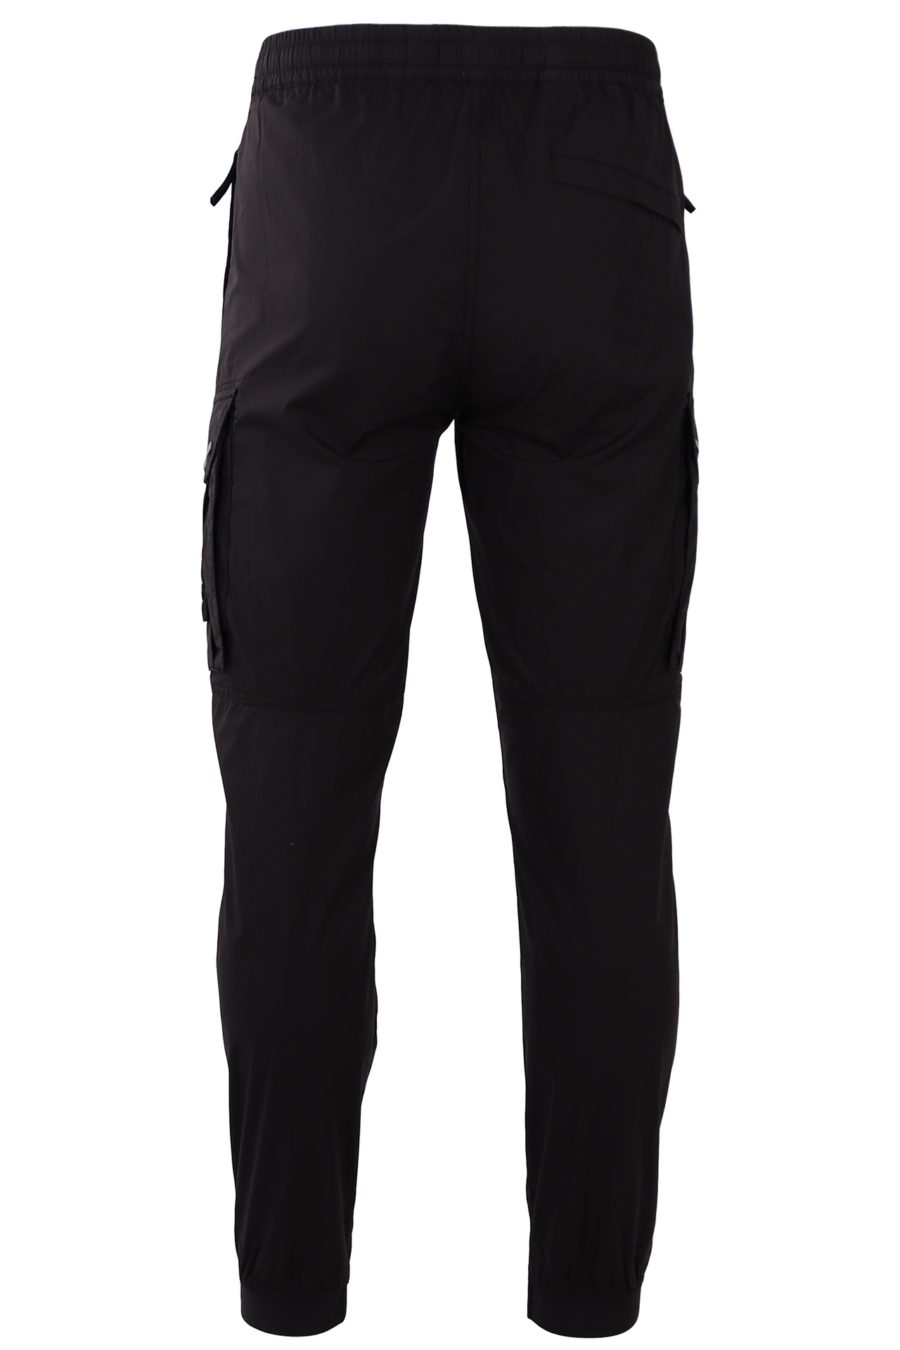 Stone Island black trousers with patch - aabef686161bb6e63d9a939545fa583535d532f986c2